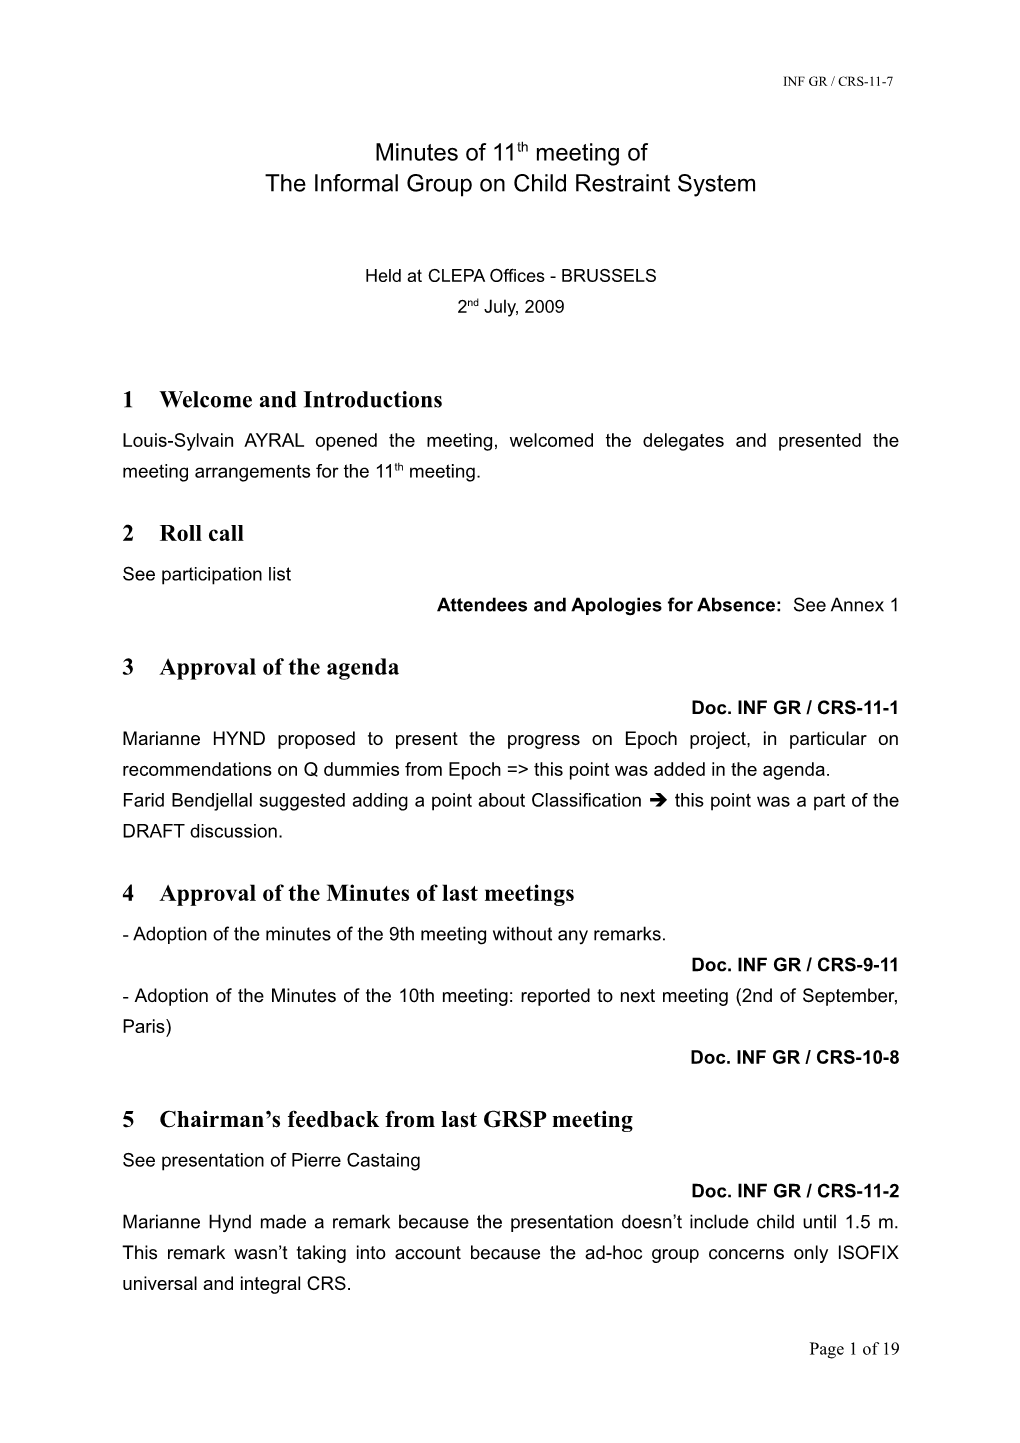 Provisional Agenda for 1St Meeting